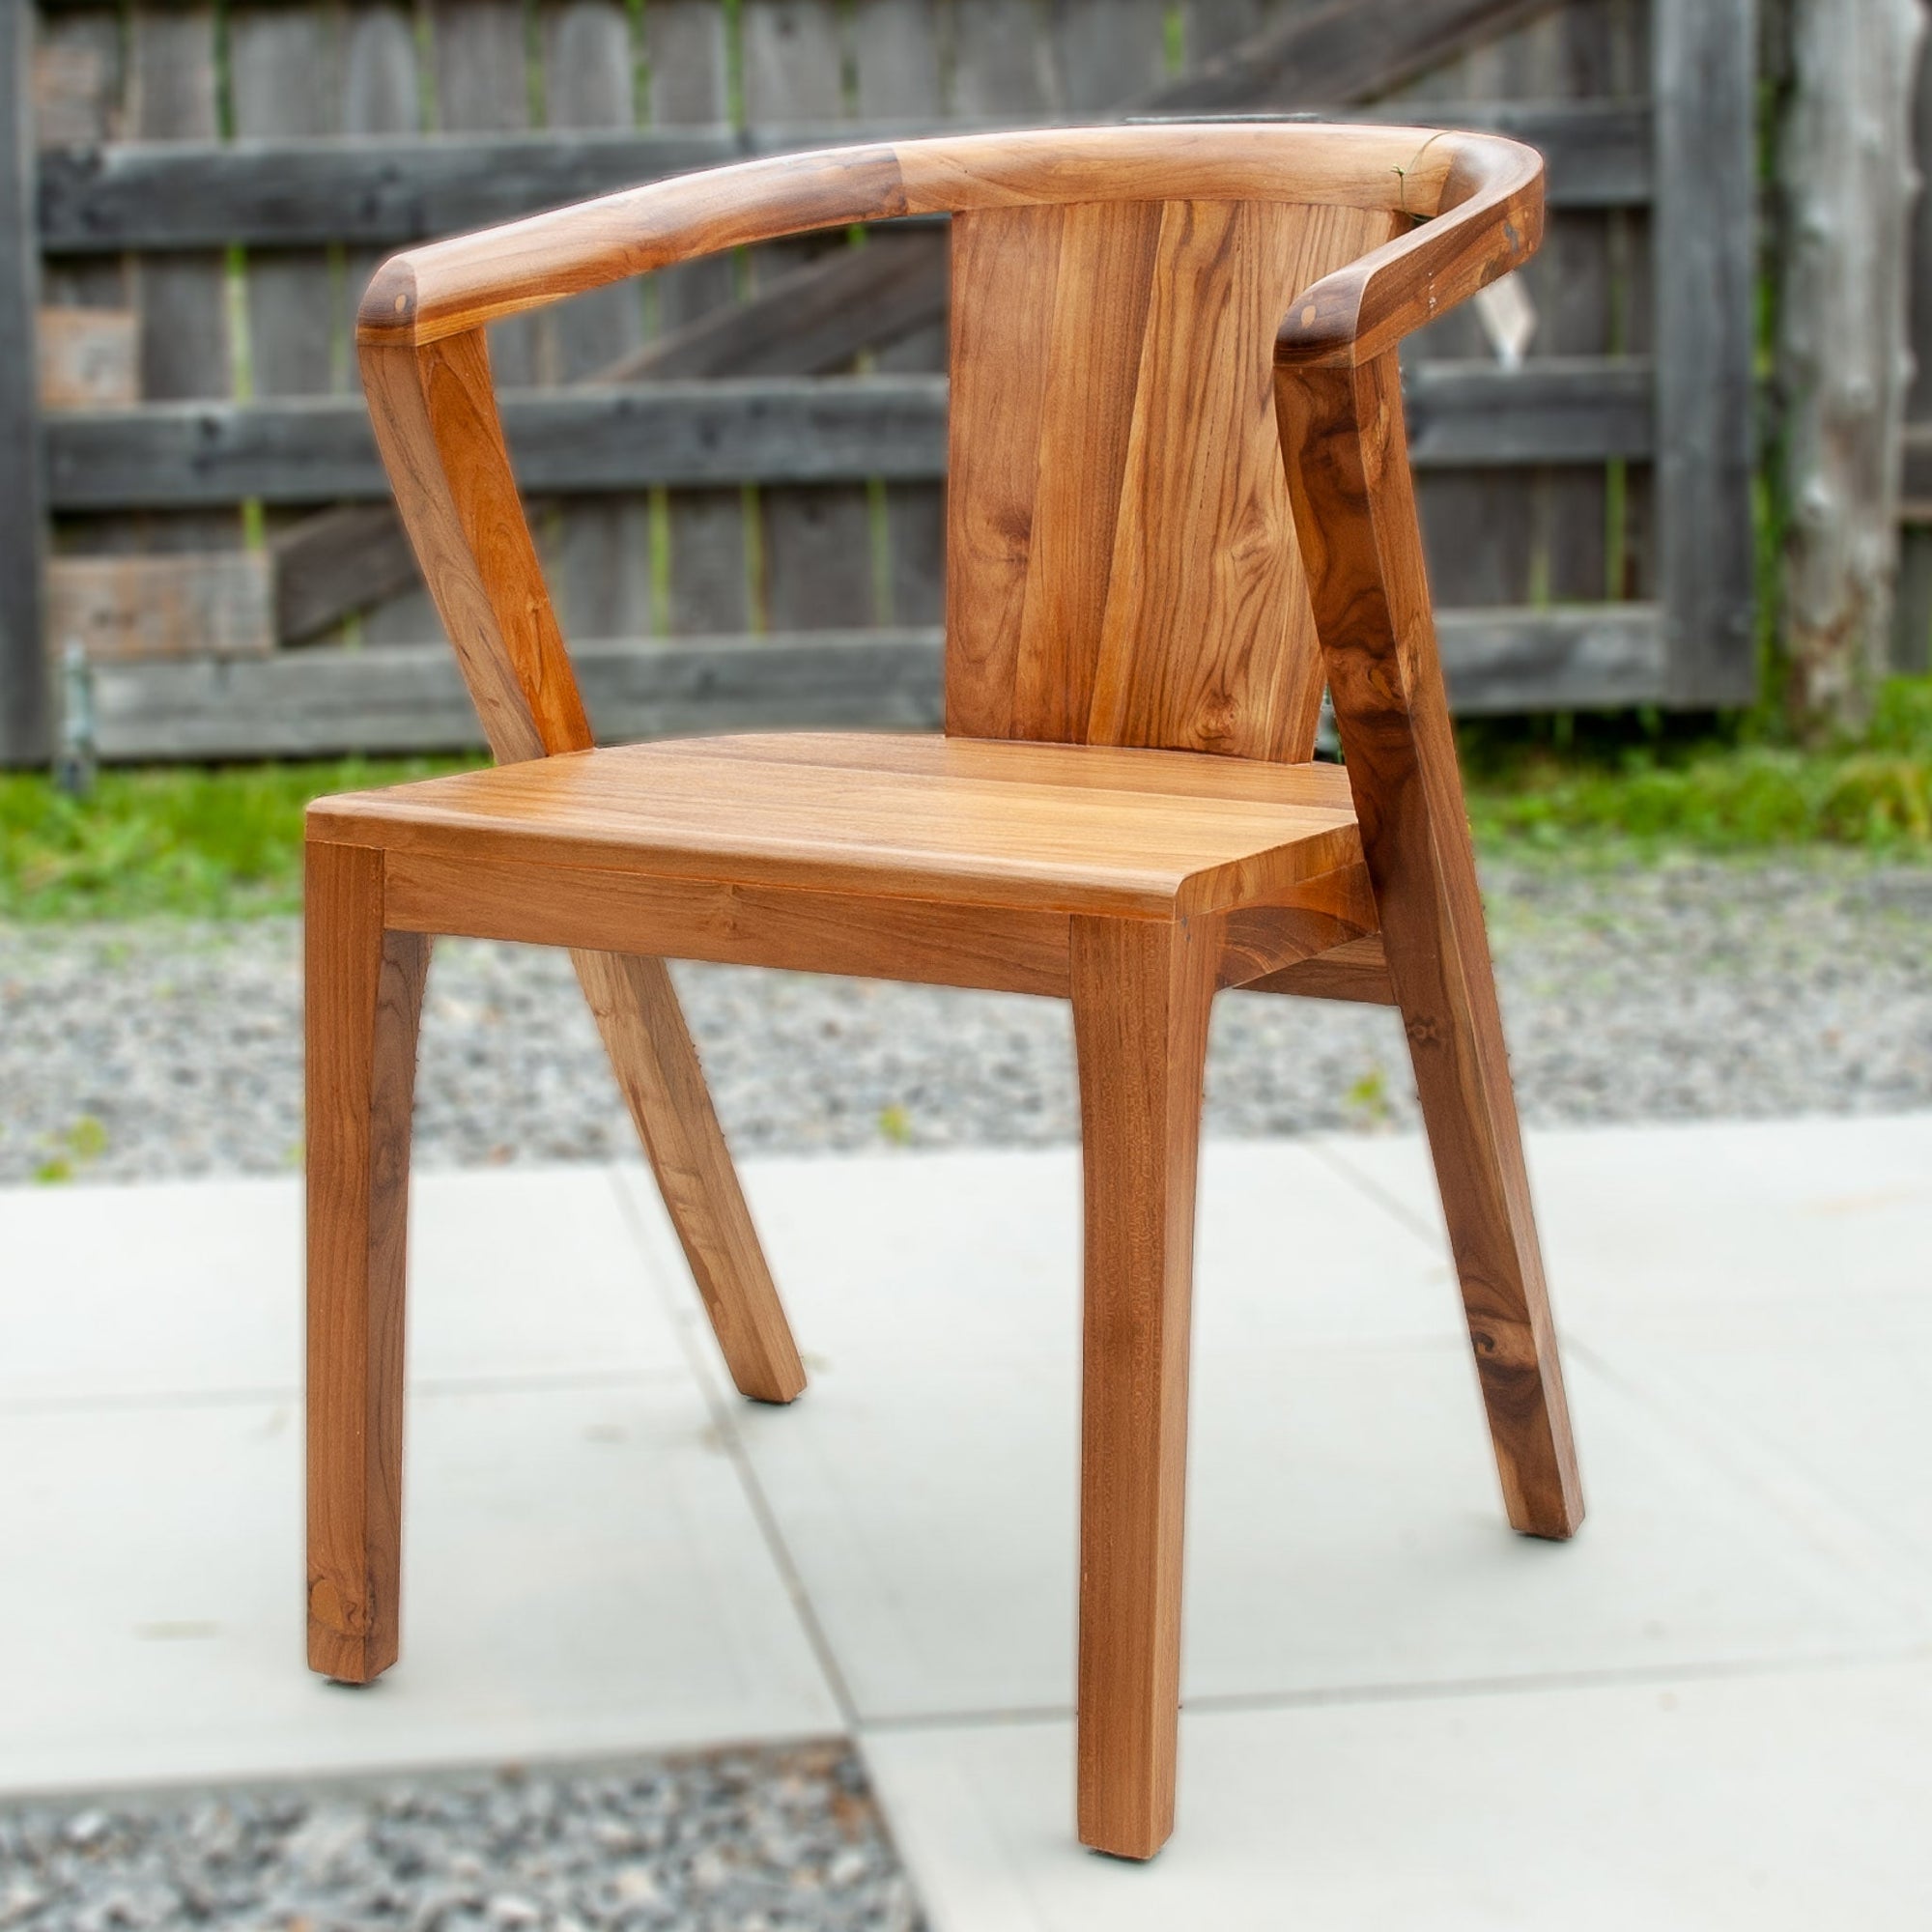 An image of a Javanese Teak Mid-Century Modern (MCM) style dining chair. The chair features a sleek design with clean lines and a minimalist aesthetic. Made from rich teak wood, the dining chair showcases the natural beauty of the wood grain, creating a warm and inviting ambiance.